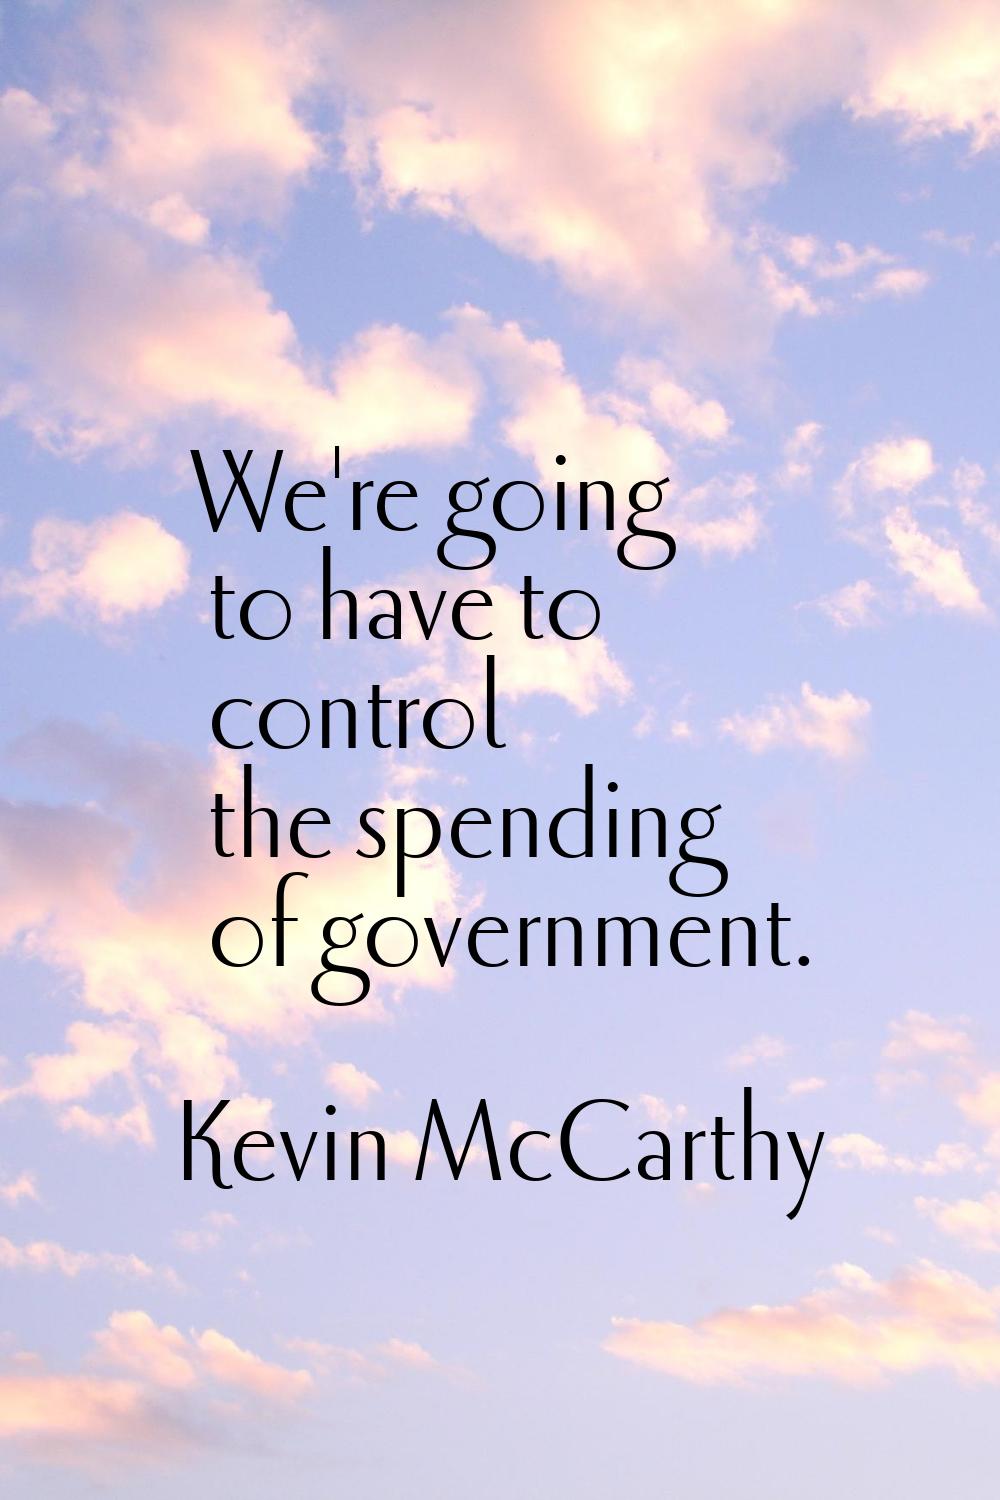 We're going to have to control the spending of government.